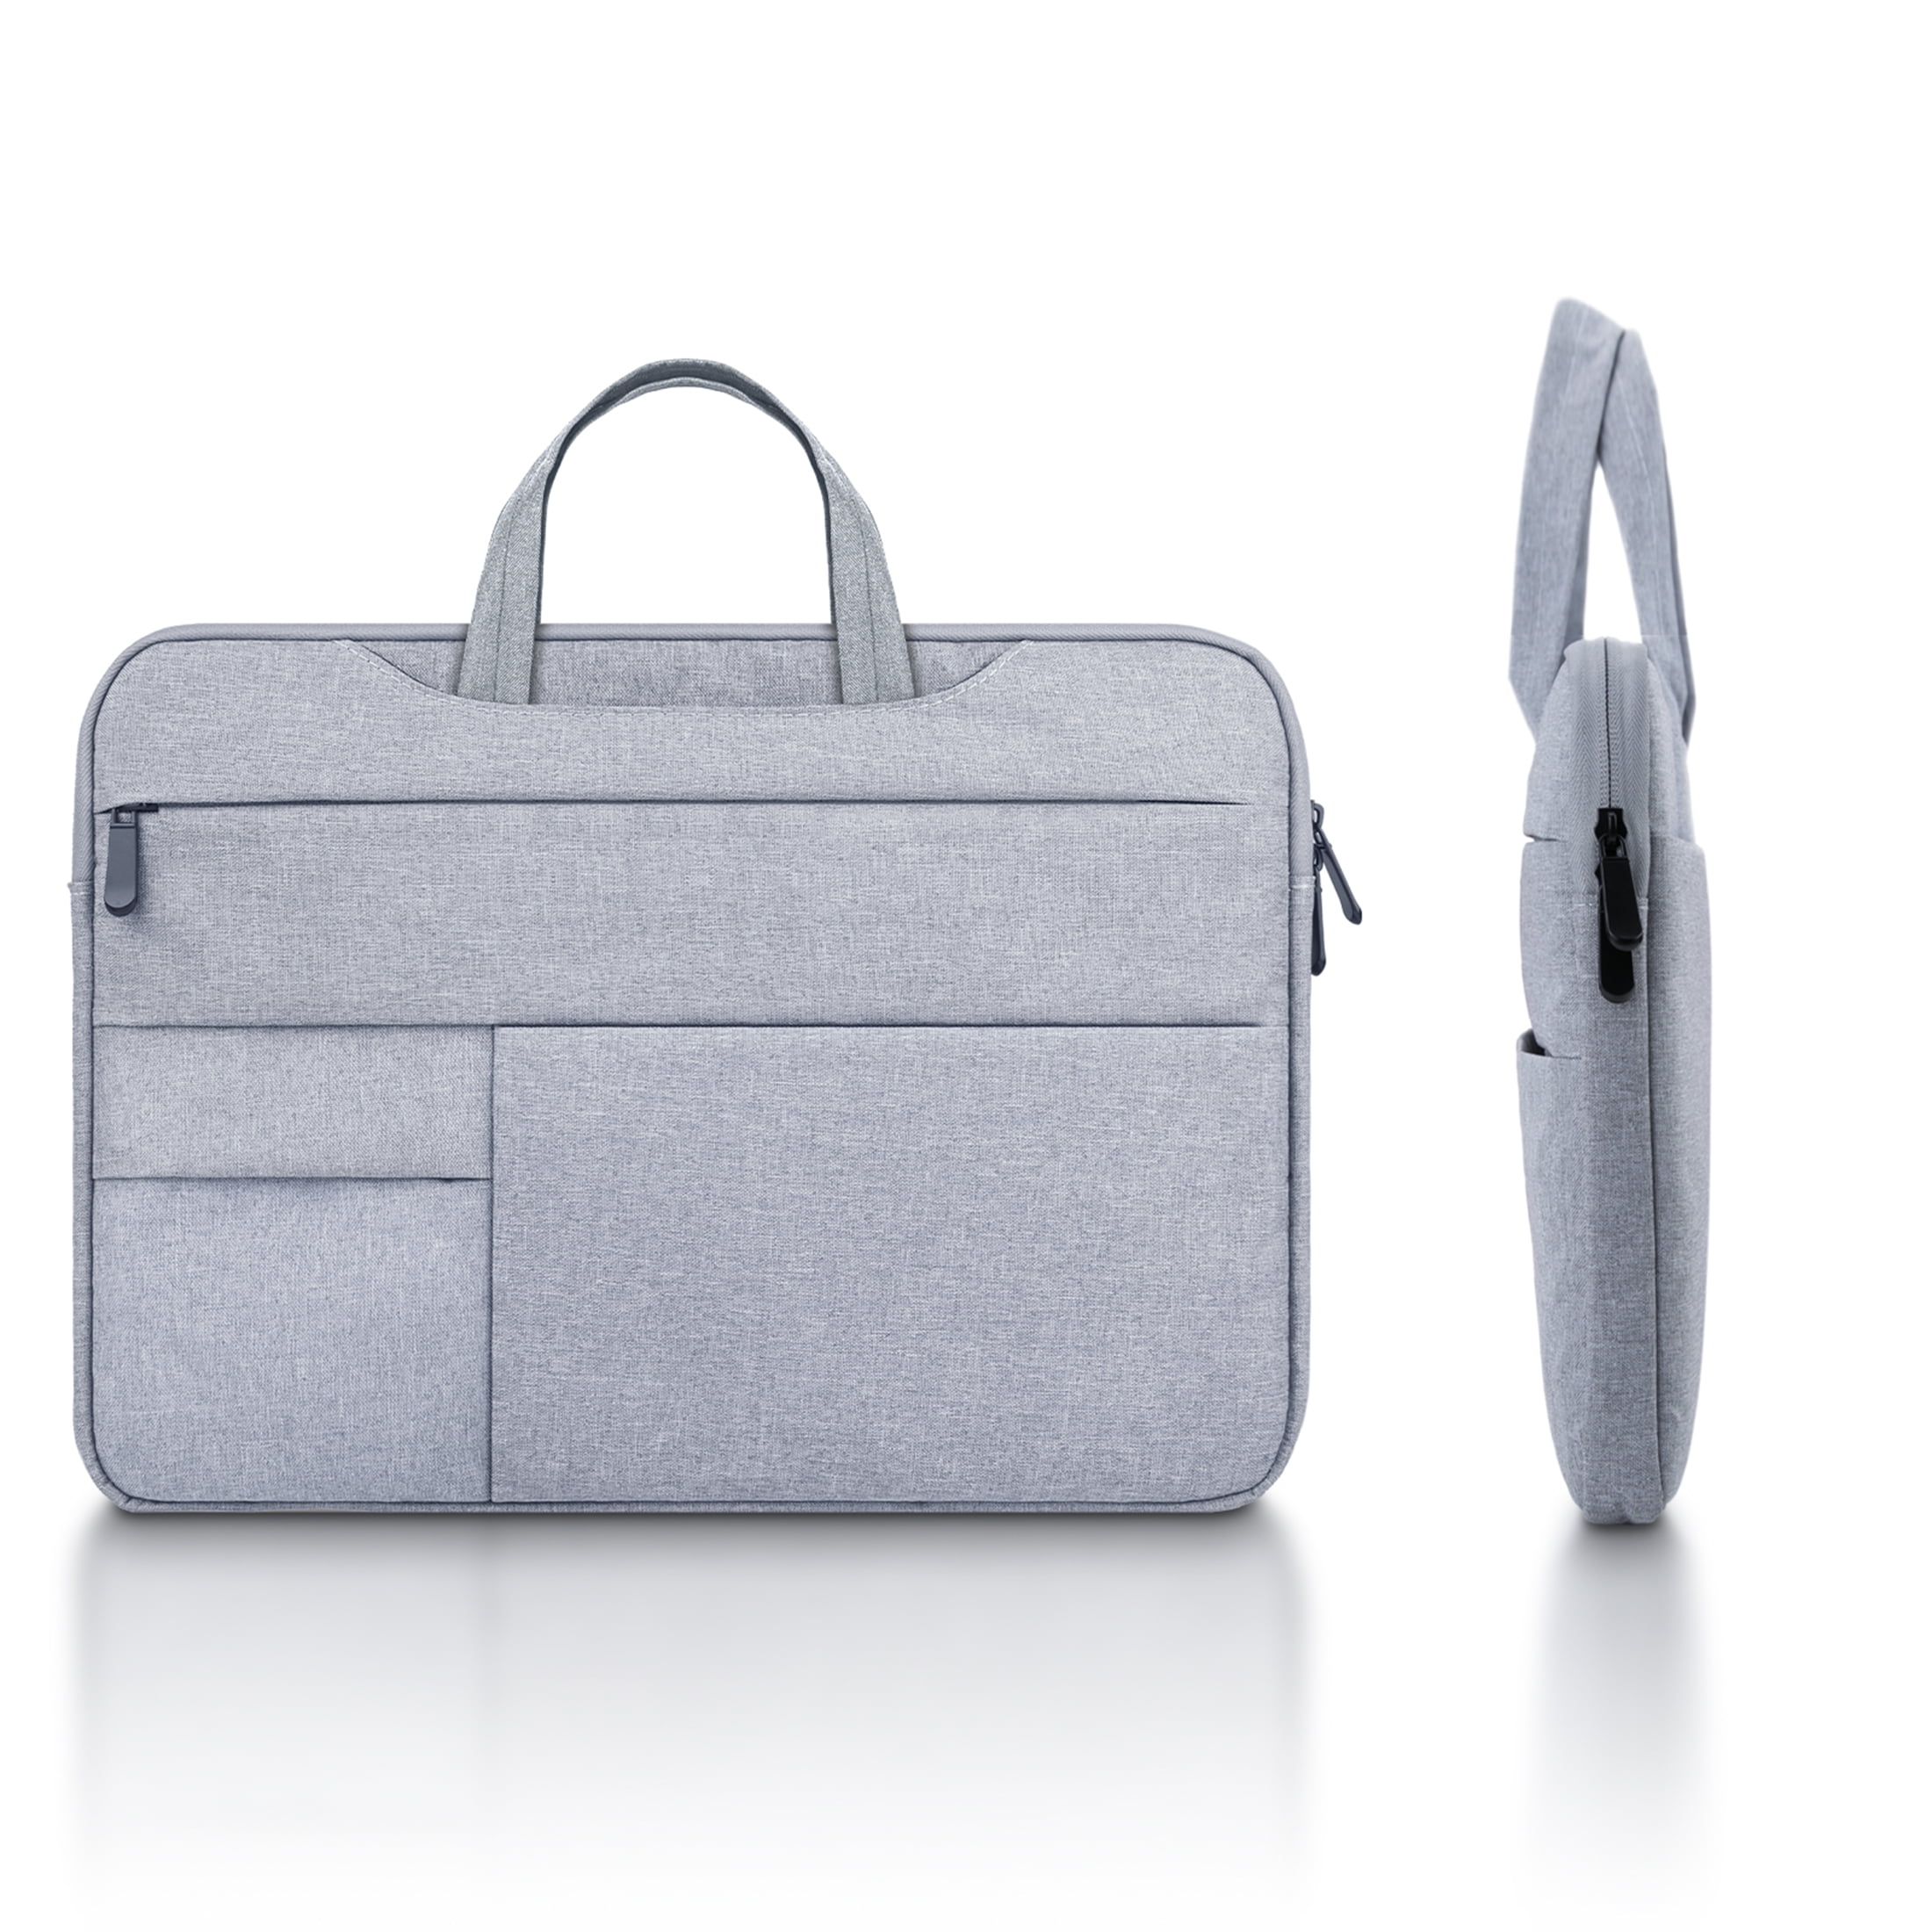 S Lock Briefcase will fit a MacBook Pro 16, barely : r/Louisvuitton